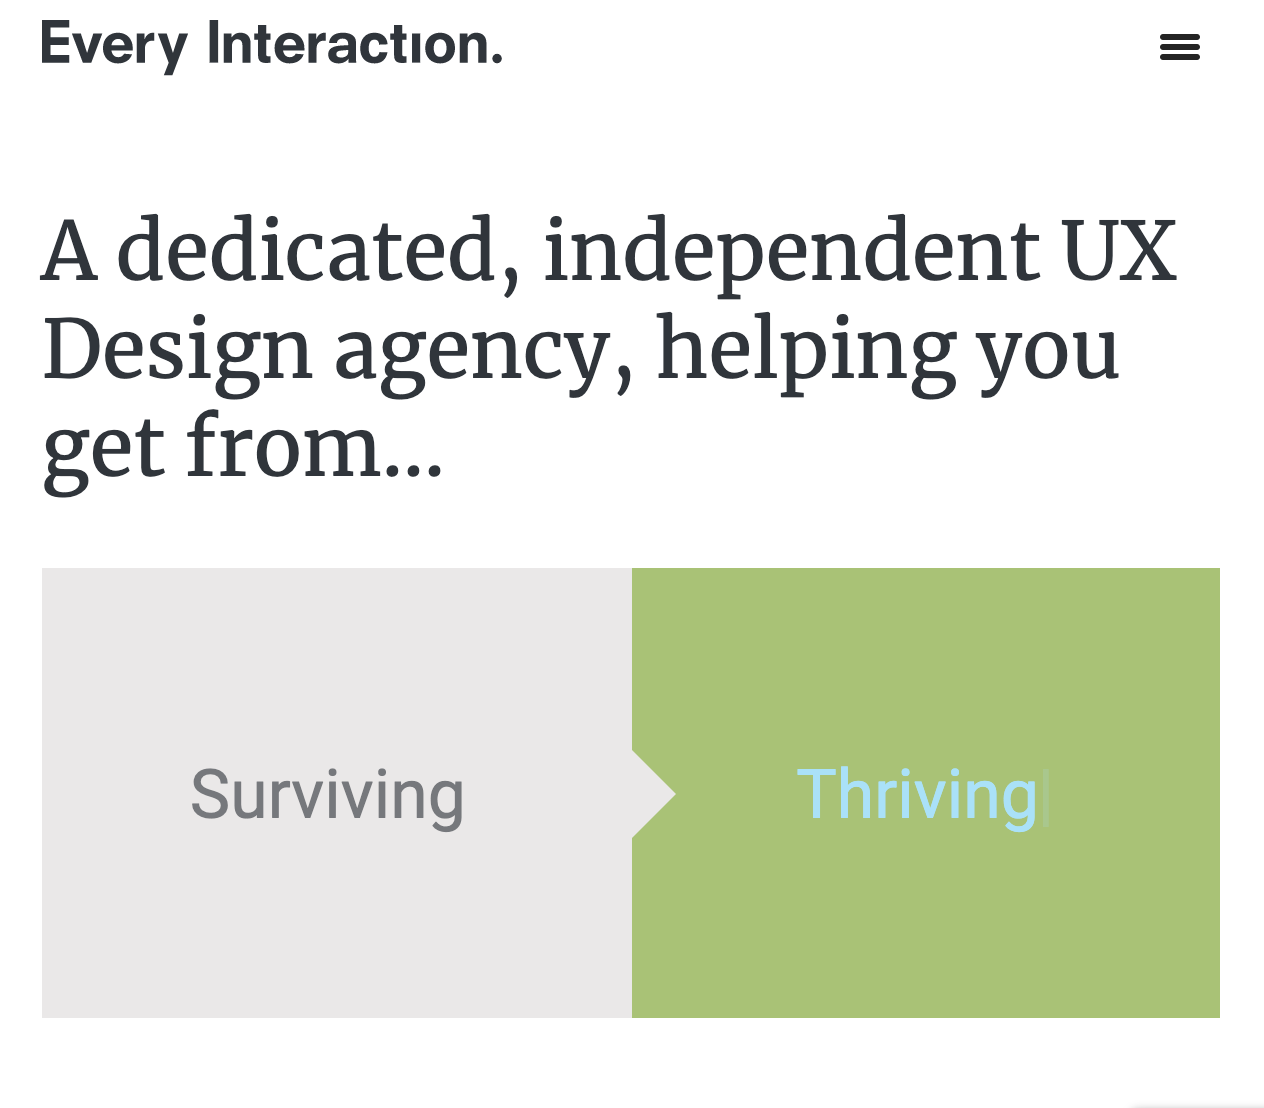 Agency positioning for Every Interaction